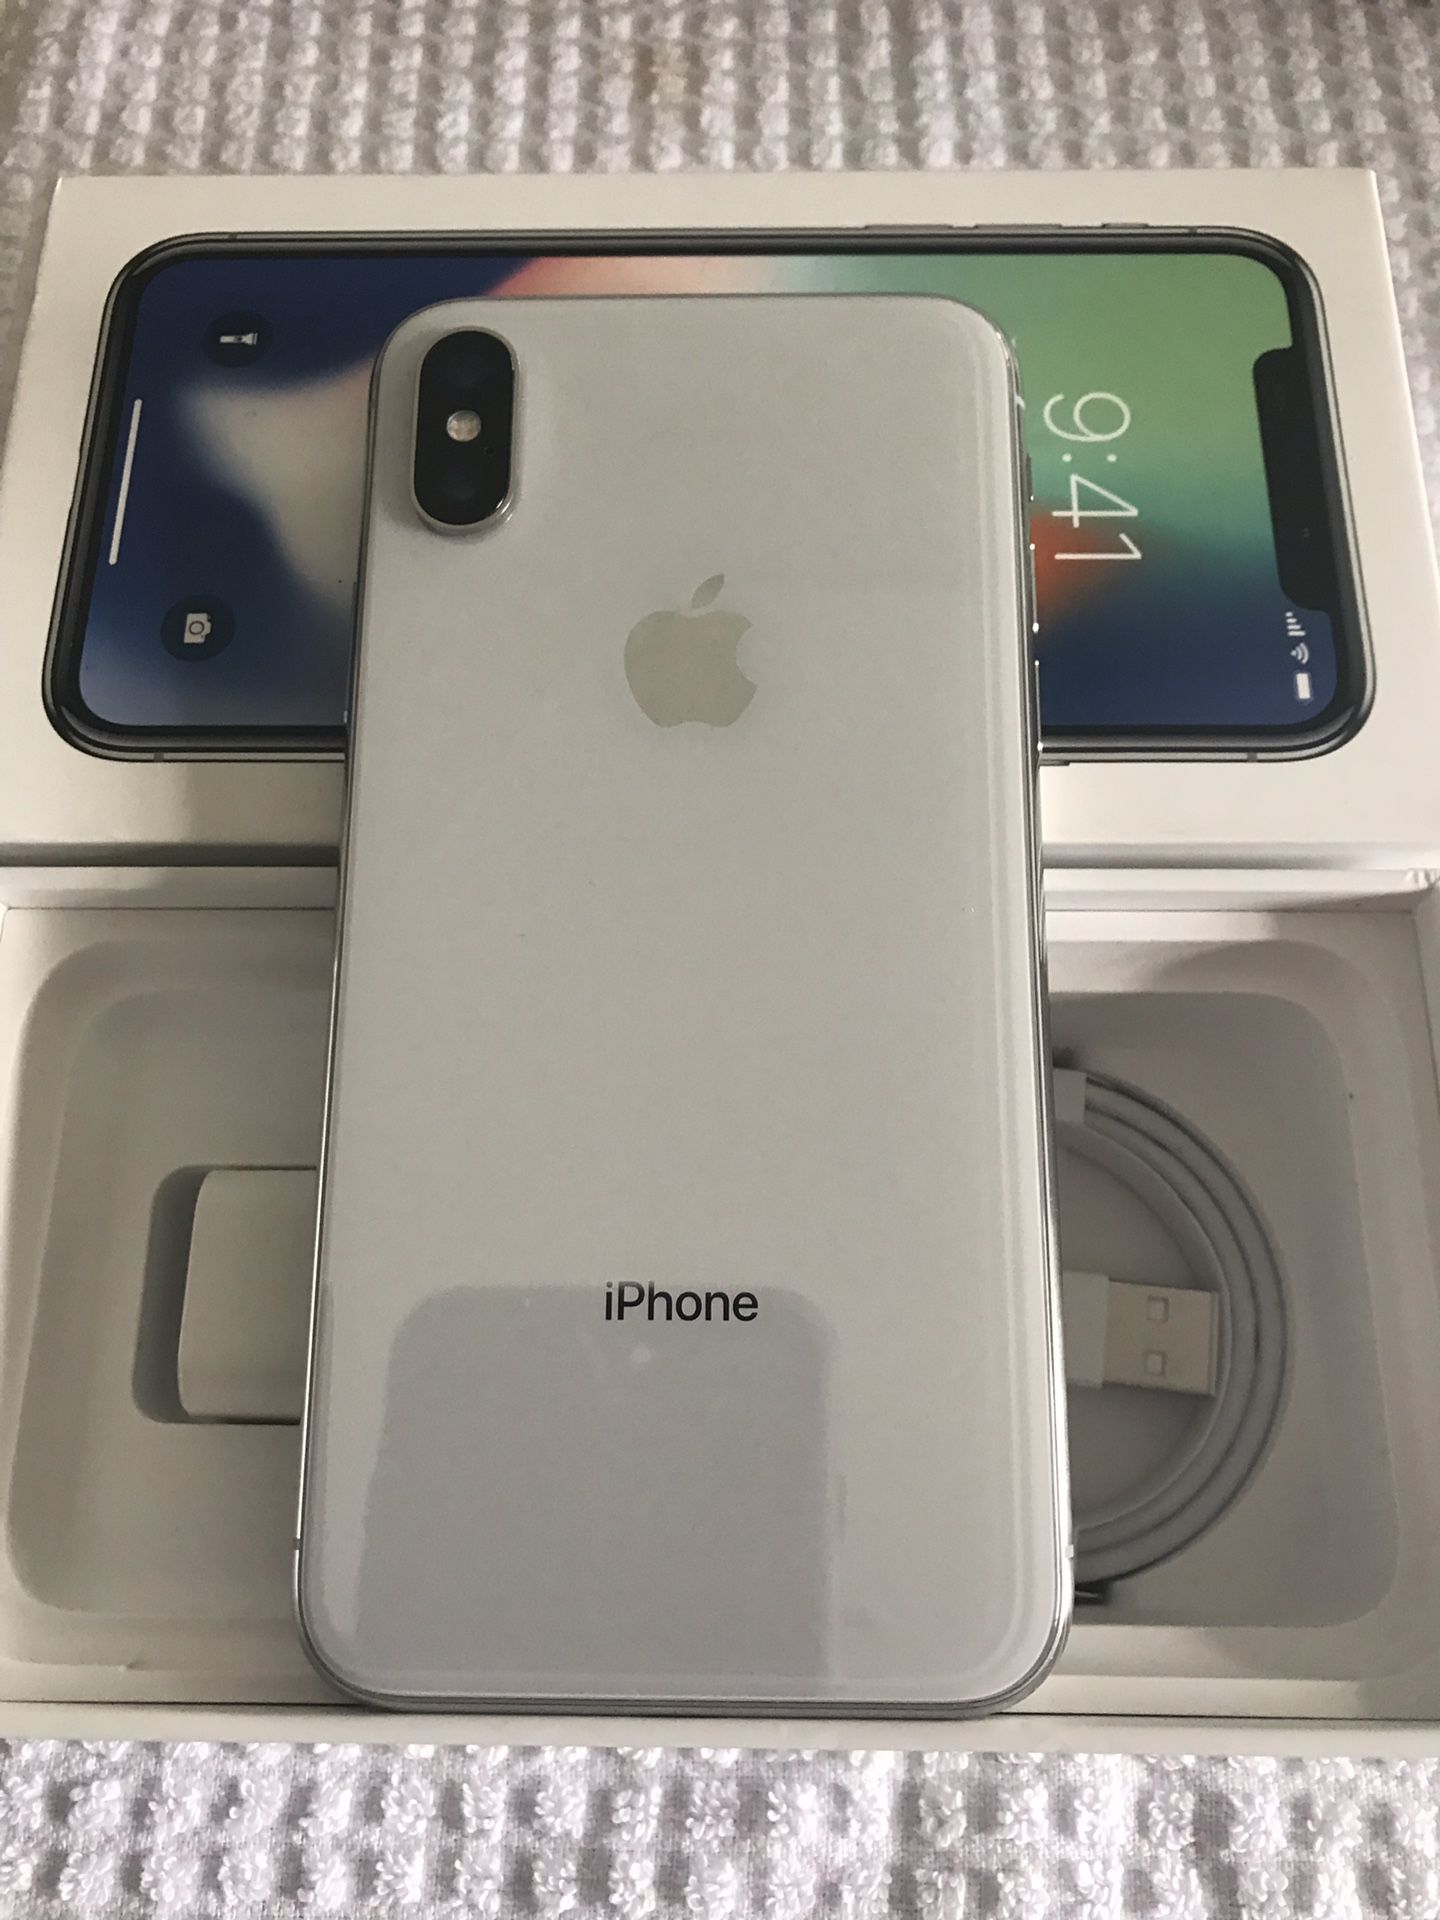 EXCELLENT CONDITION Apple iPhone X 64GB (T-Mobile) UNLOCKED +USB CABLE +CHARGER $450 FIRM